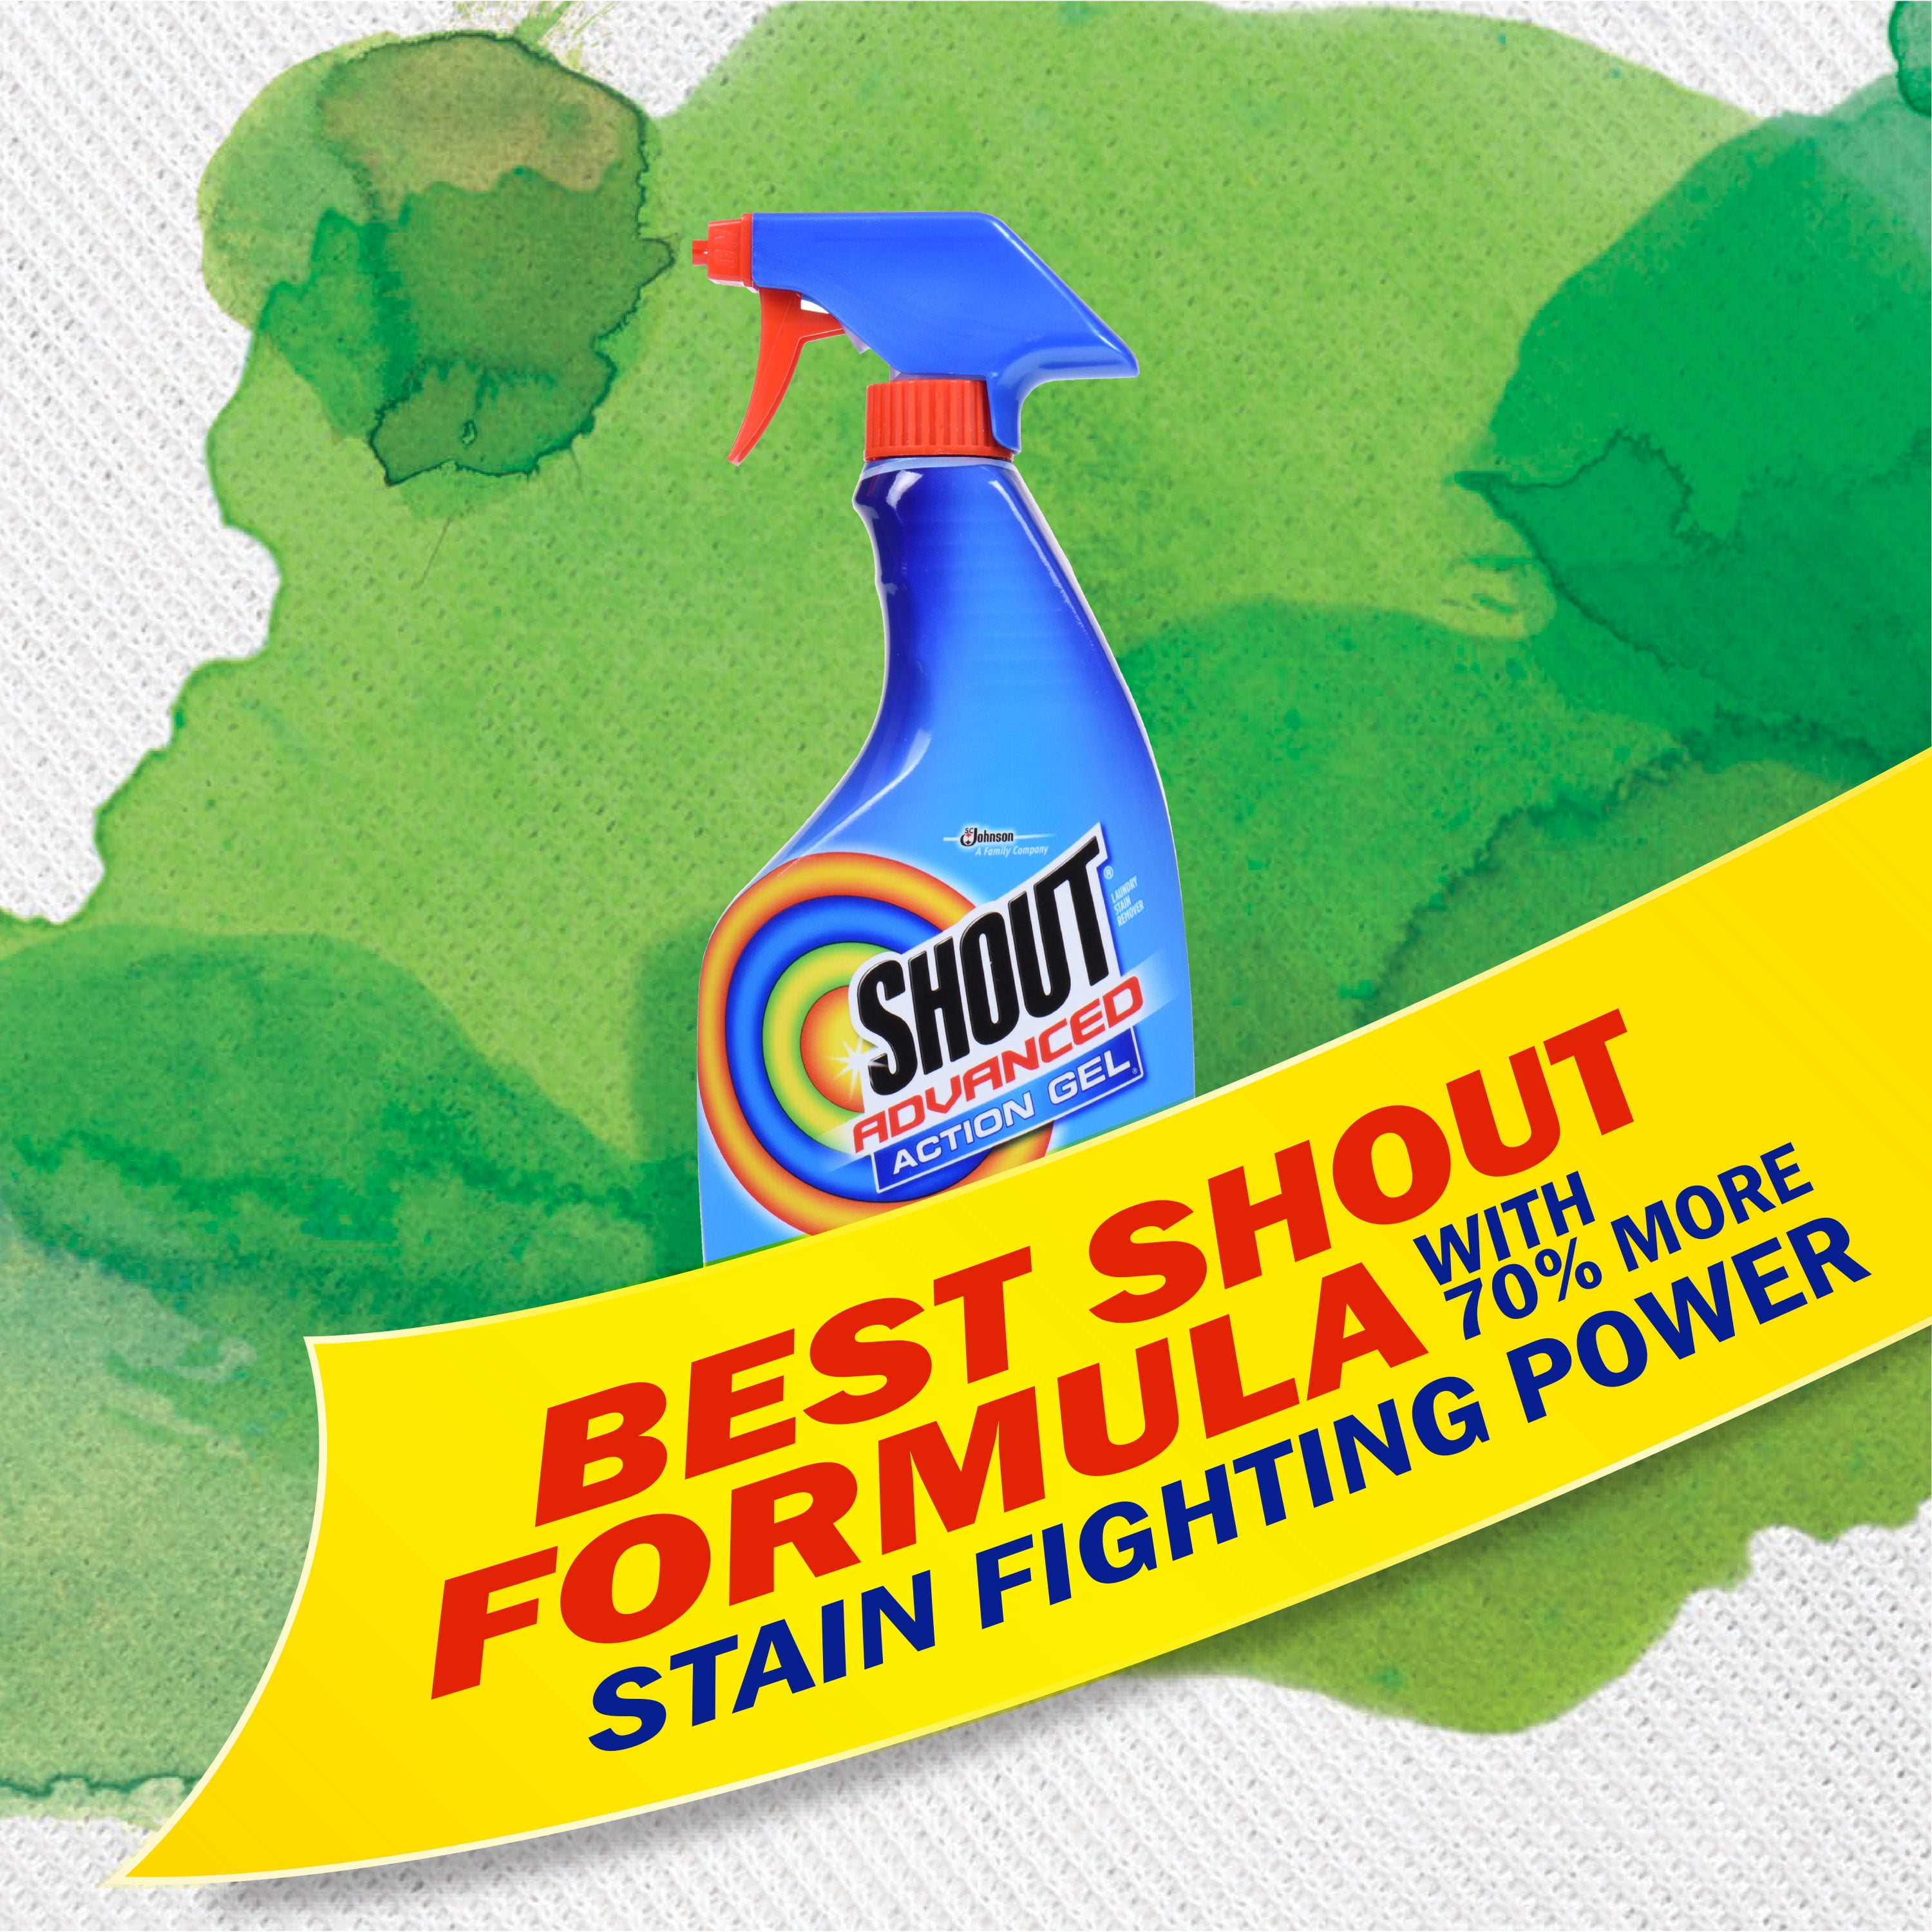 Shout Laundry Stain Remover Editorial Image - Image of laundry